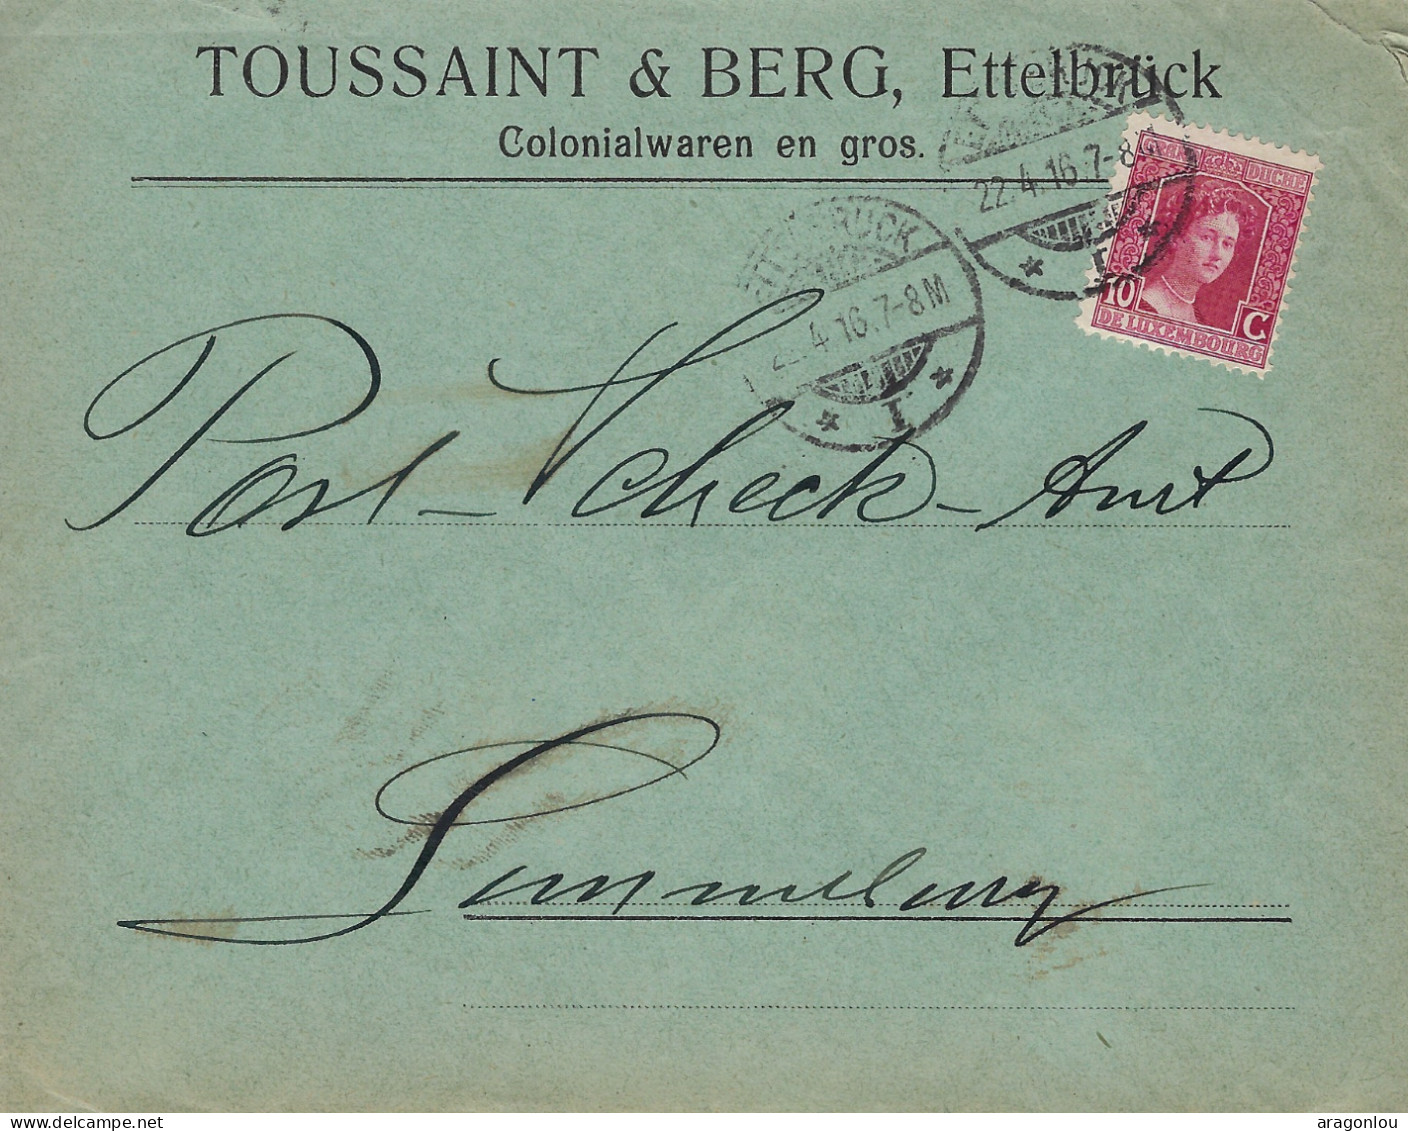 Luxembourg - Luxemburg - Lettre  1916  An Das Post -Scheck-Amt , Luxembourg- Cachet Luxembourg - Briefe U. Dokumente